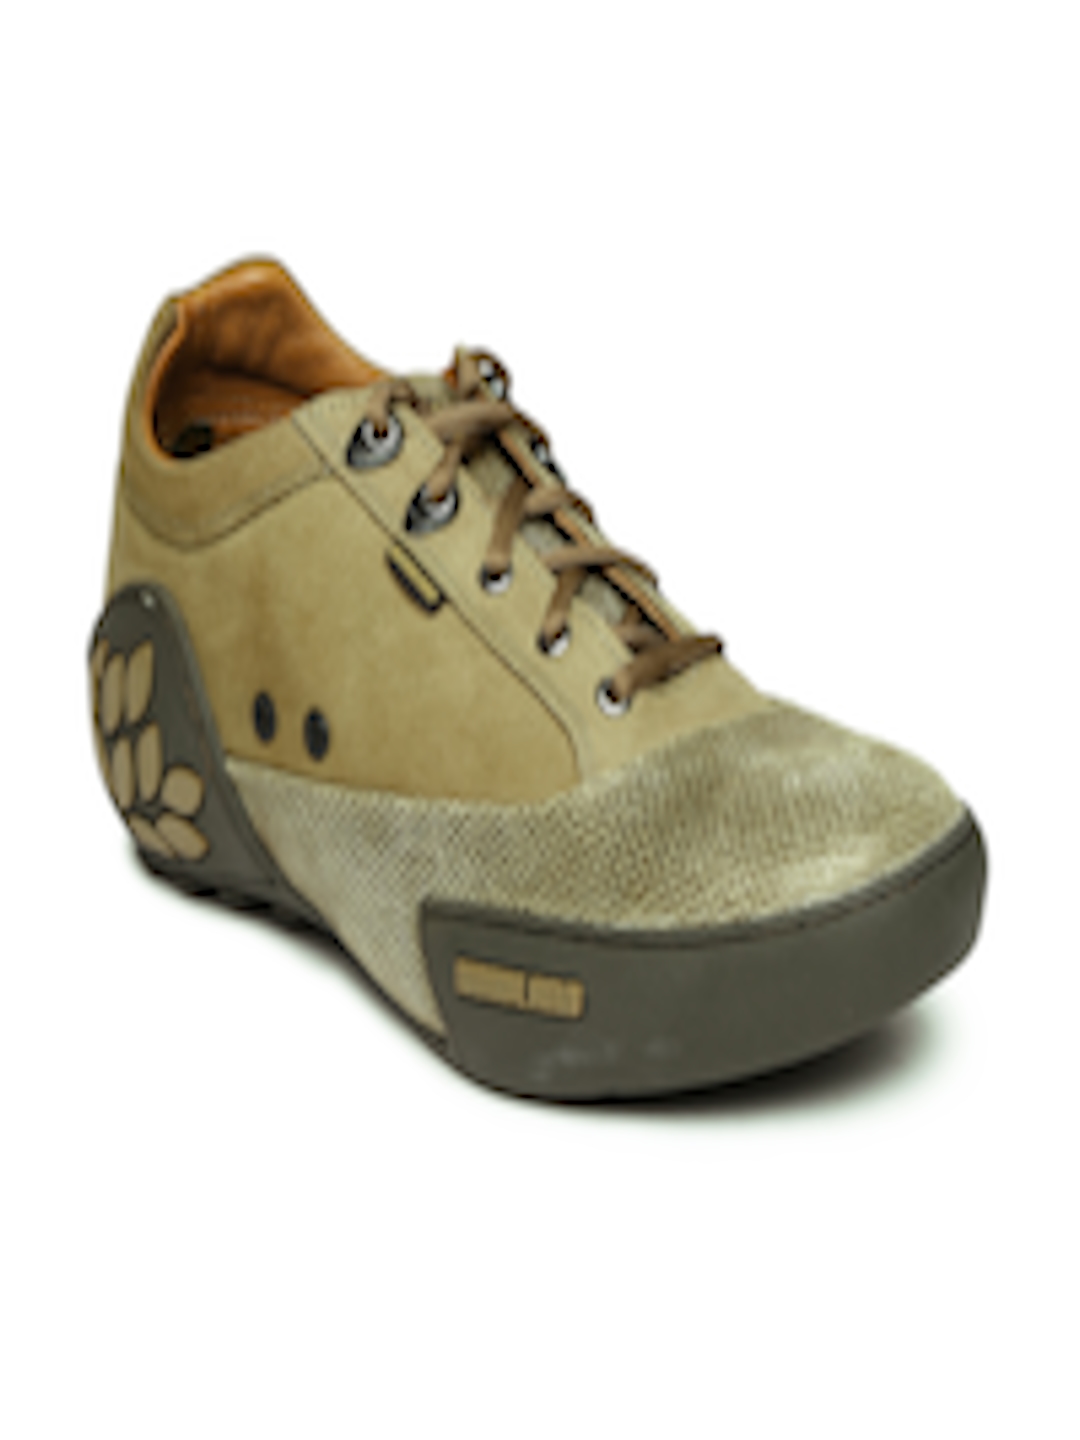 Buy Woodland Men Olive Green Leather Casual Shoes Casual